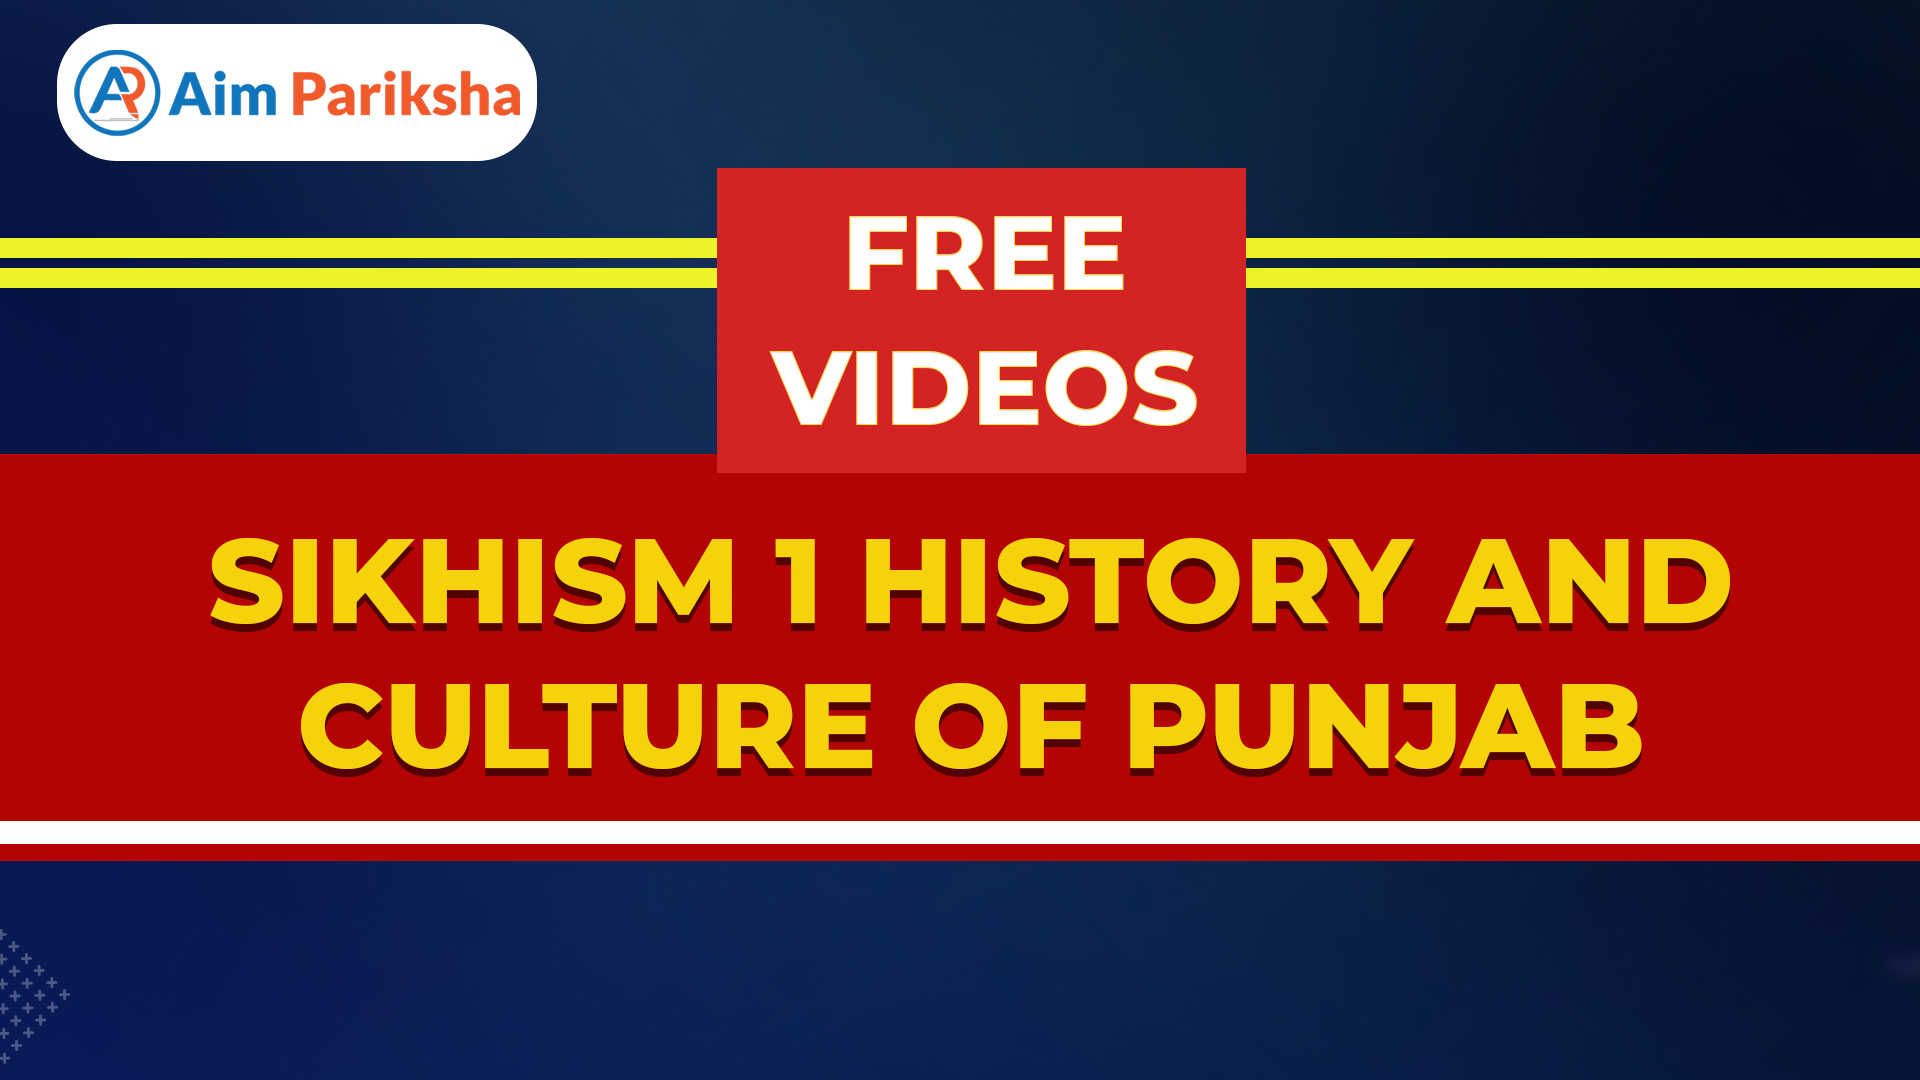 SIKHISM-1 HISTORY AND CULTURE OF PUNJAB